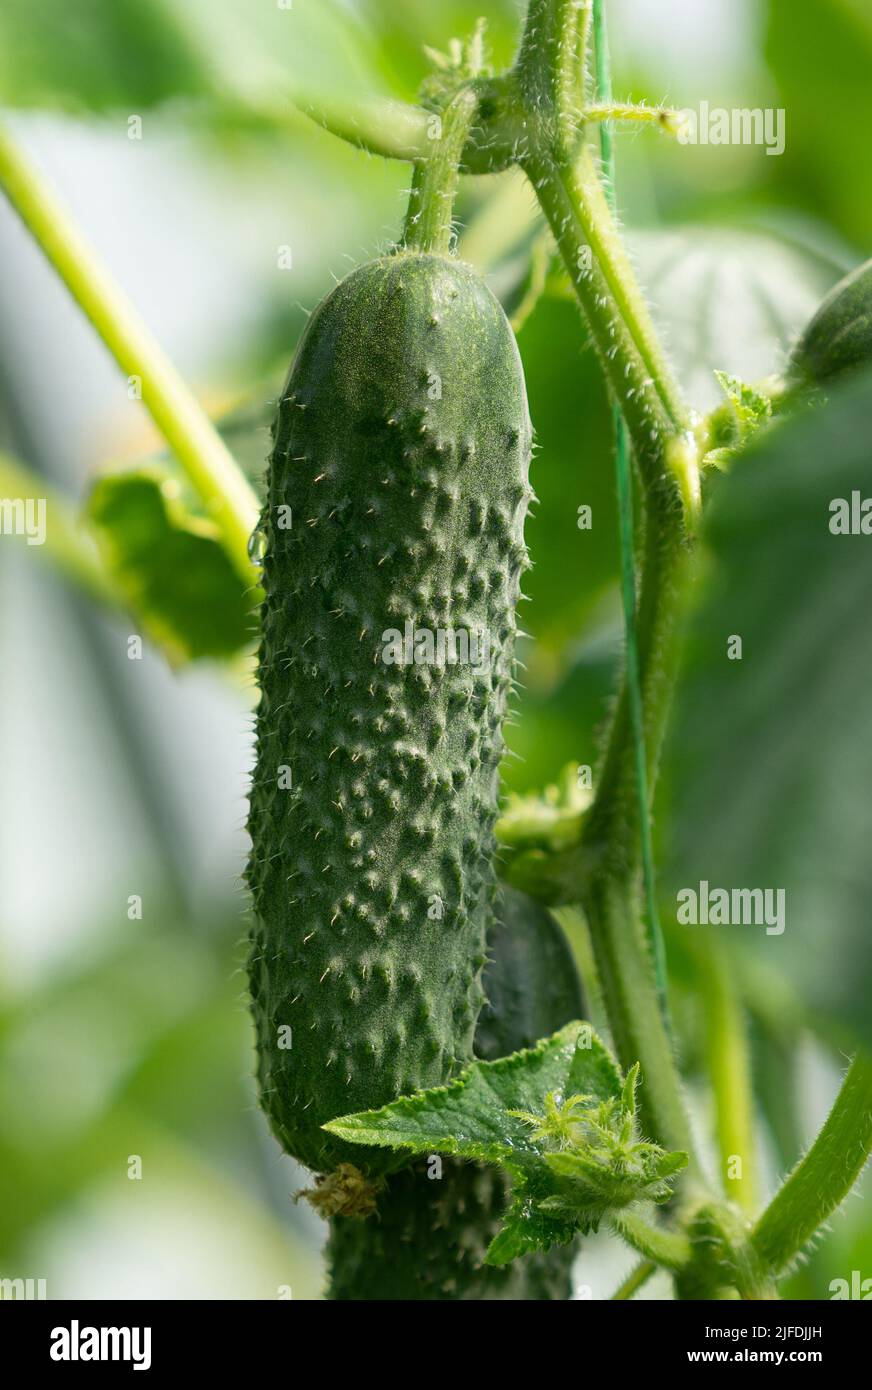 Ripe cucumbers growing on plant in hothouse Stock Photo